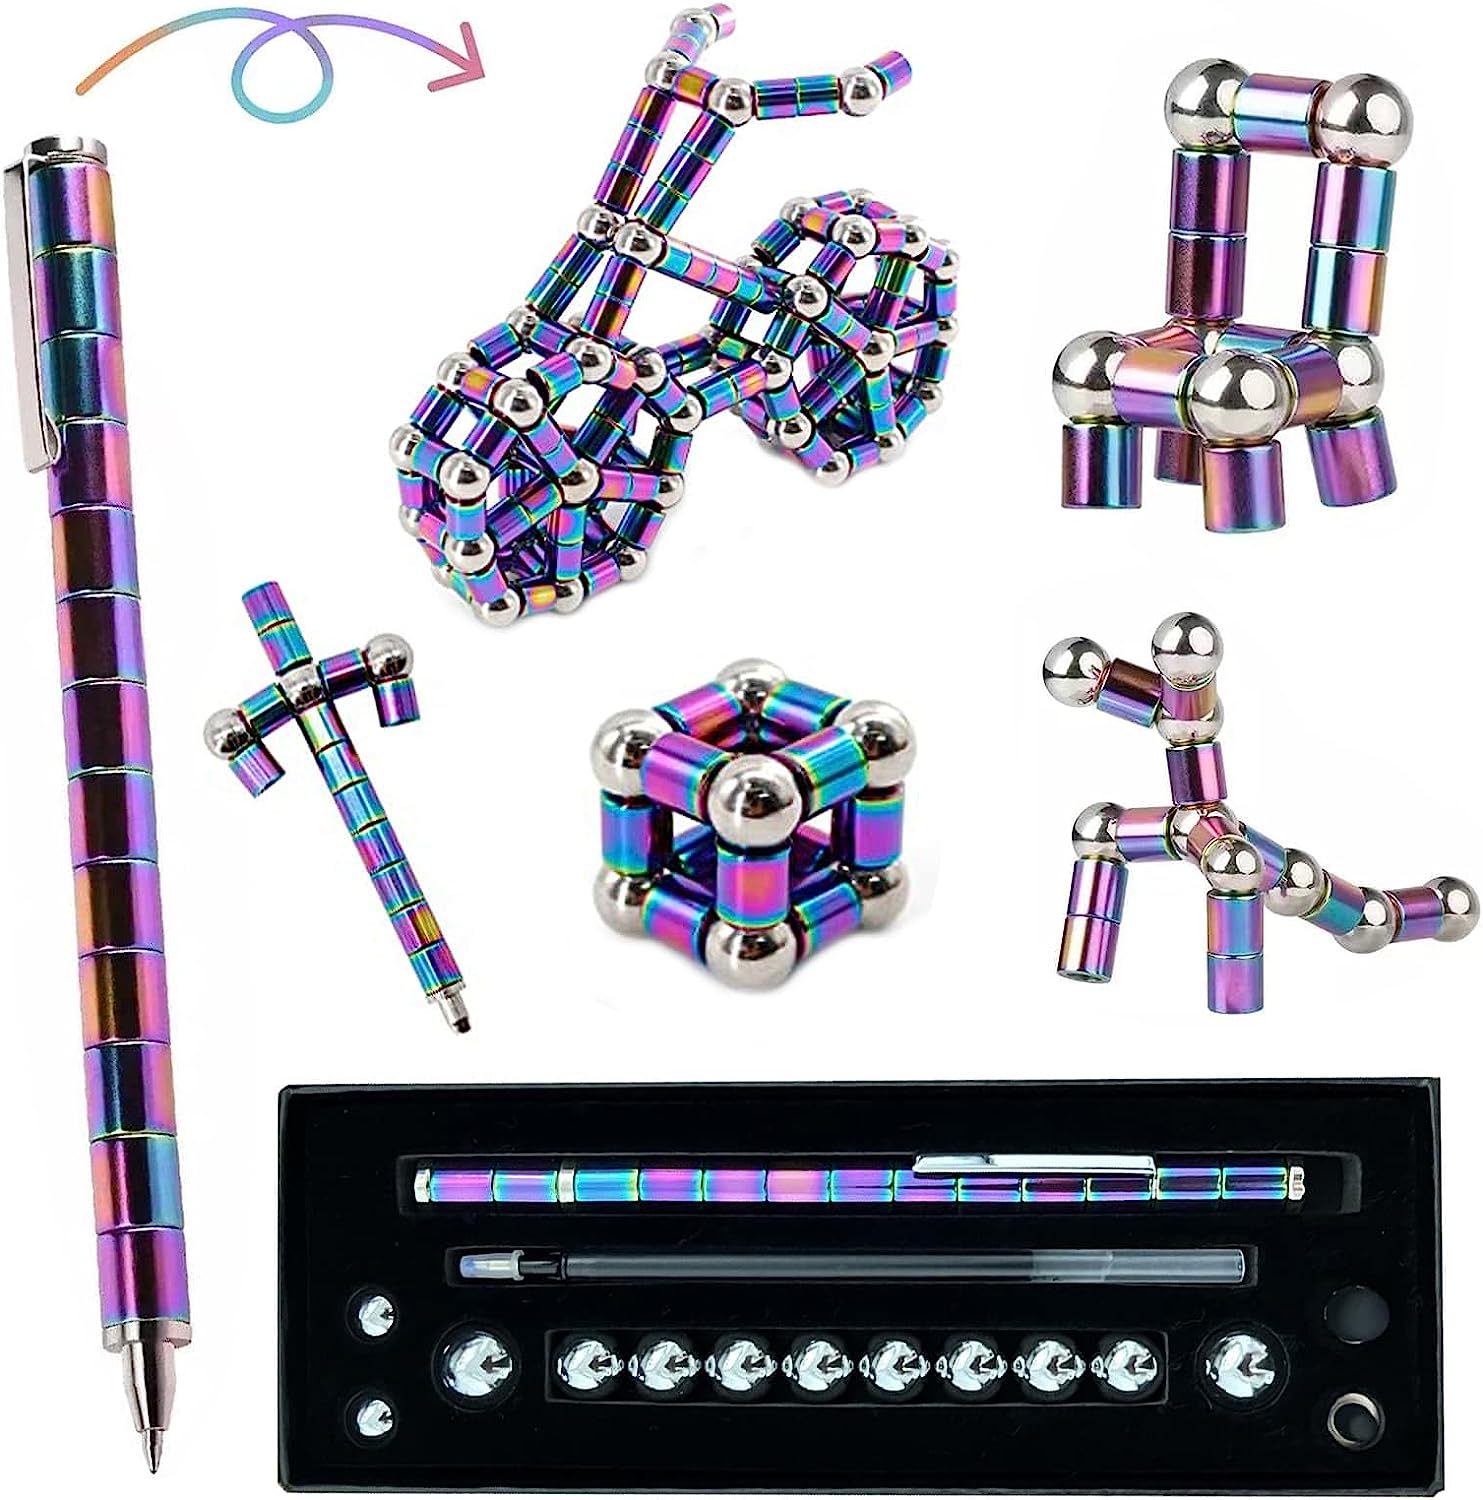 Magnetic Fidget Pen Toys For Ages 8-13 - Gifts For Teenage Boy Girl Magnet Pen Decompression Toy Pen 10 11 12 13 14 15 Year Old Boy Gift Ideas - Fidget Pens For Teens Cool Presents For 10-15 Year Old